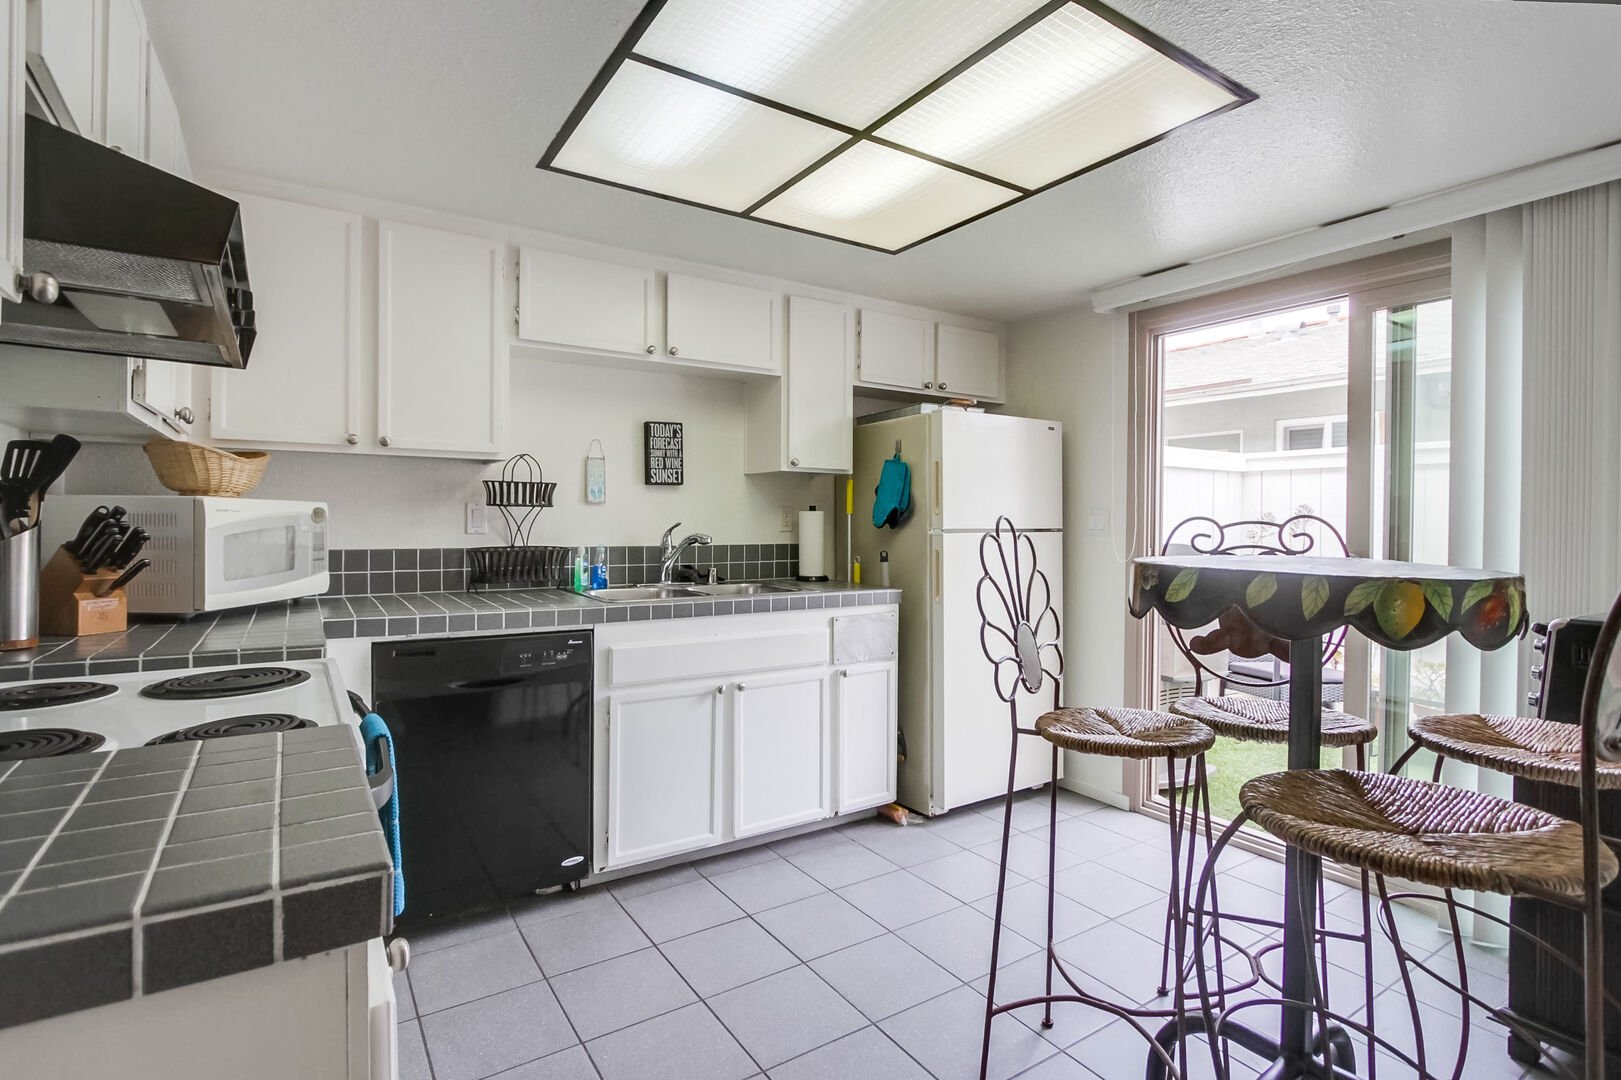 Fully equipped kitchen for meals at home with basic appliances including a dishwasher, stove and oven, refrigerator and freezer, standard coffee maker, blender, toaster and microwave